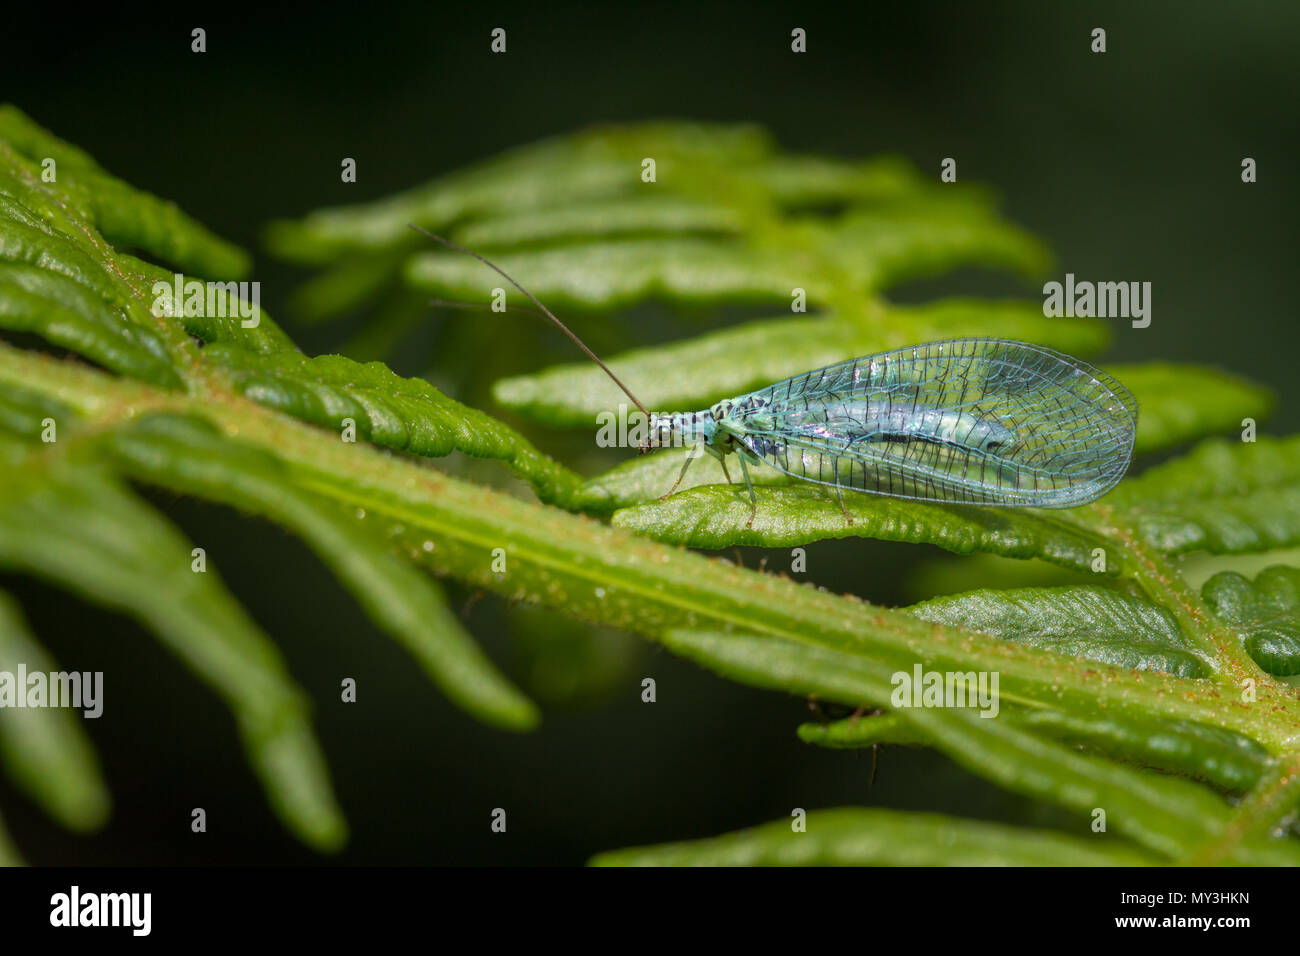 UK wildlife: Green lacewing (chrysopa perla) perched on ferns on moorland, Ilkley Moor, West Yorkshire Stock Photo